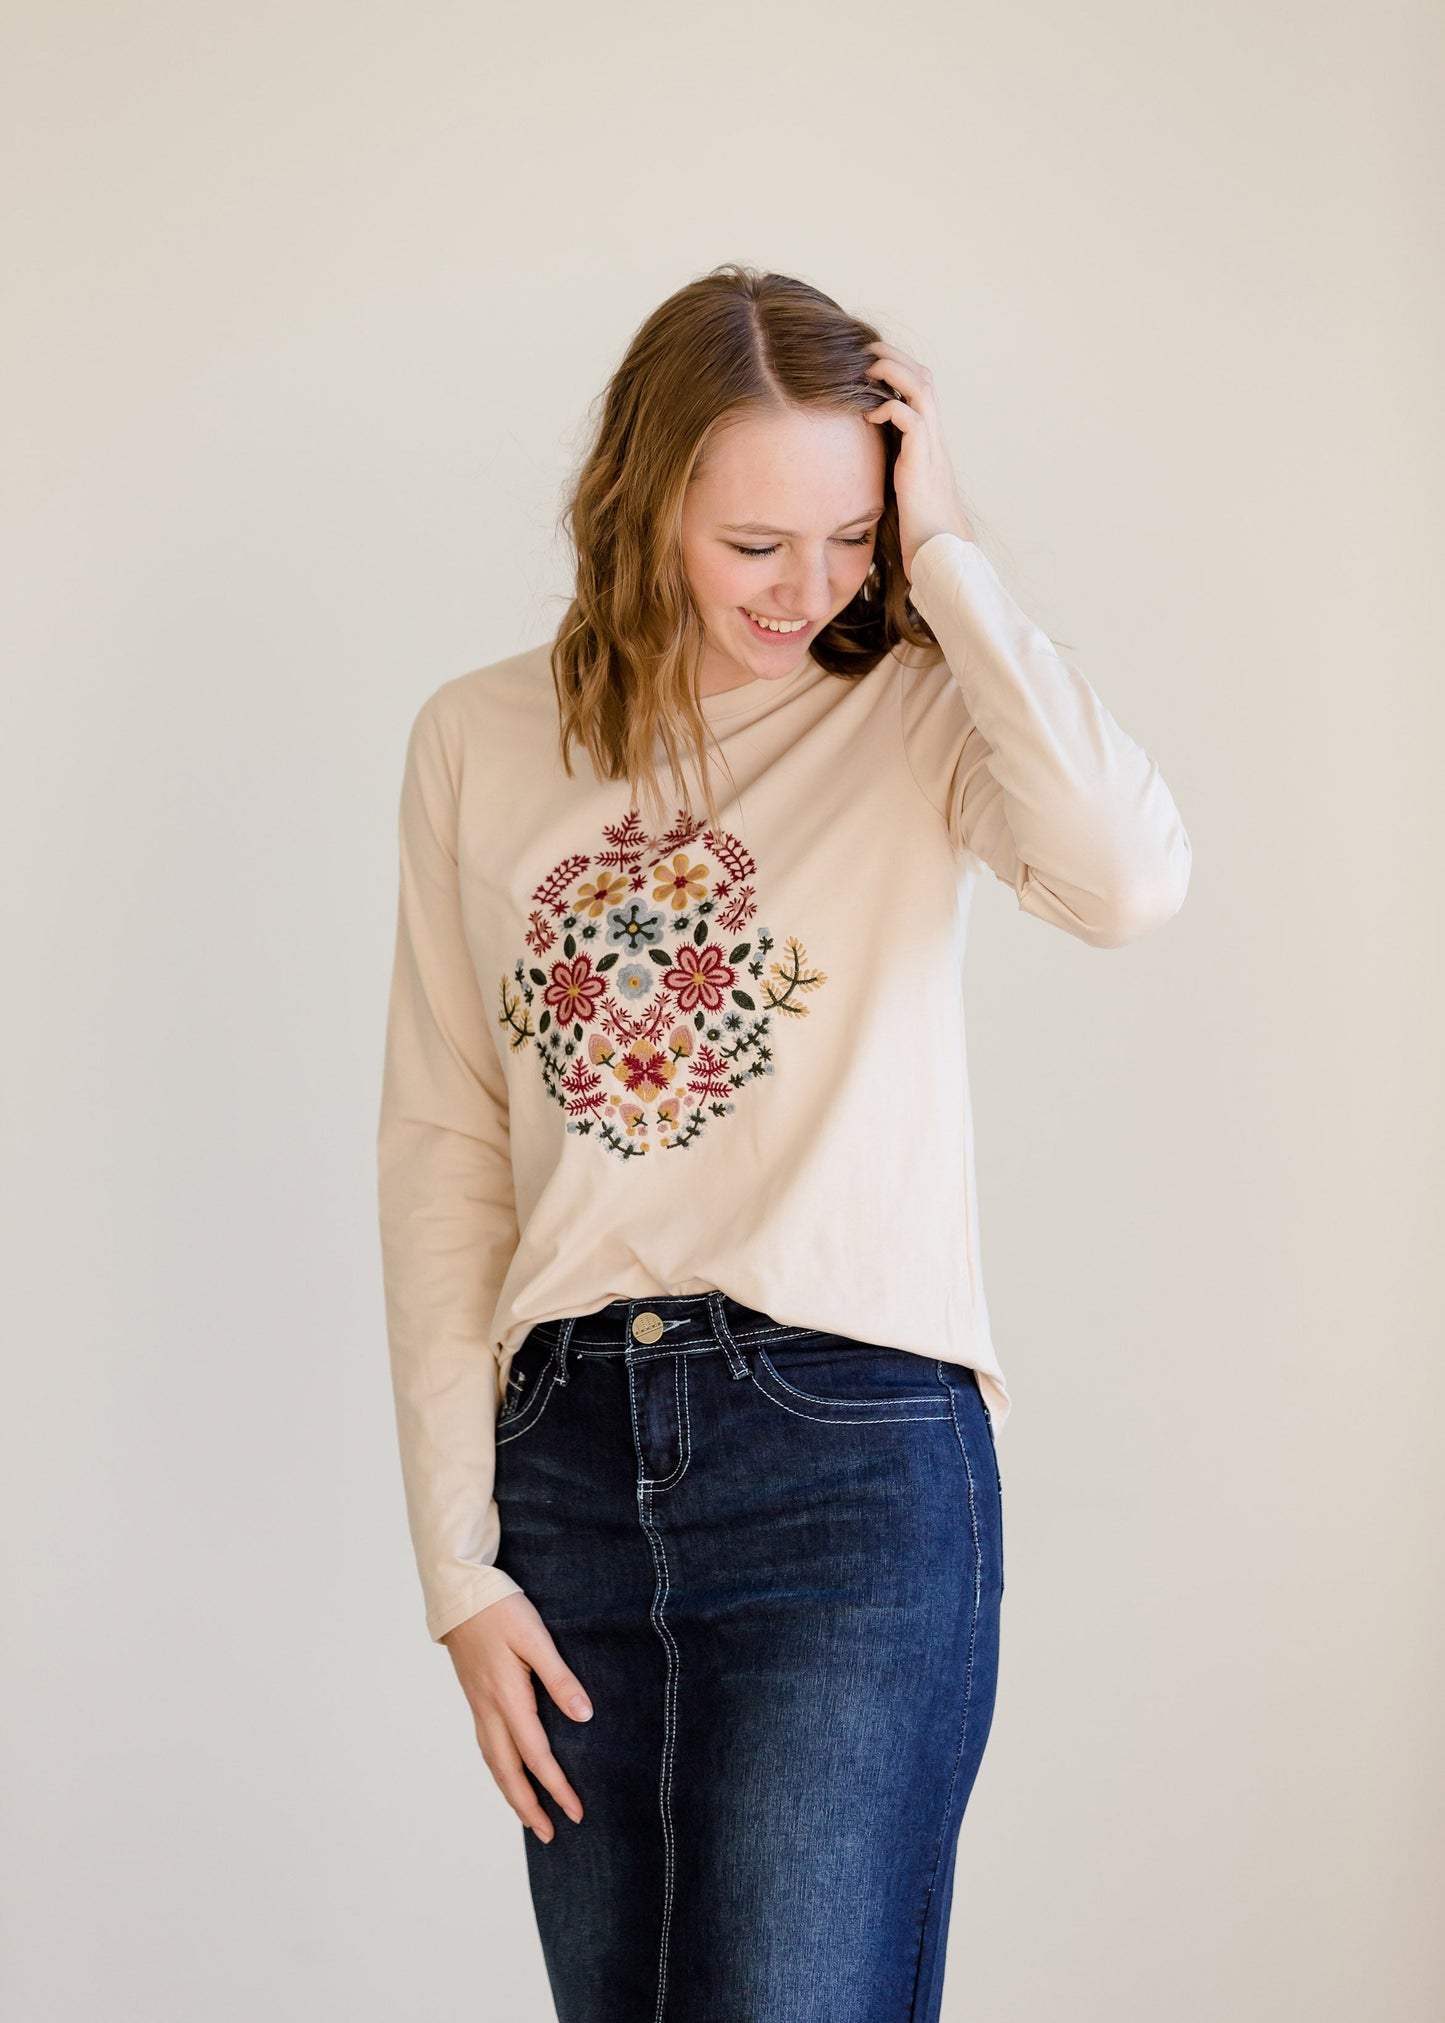 Embroidered Long Sleeve Top - FINAL SALE Tops